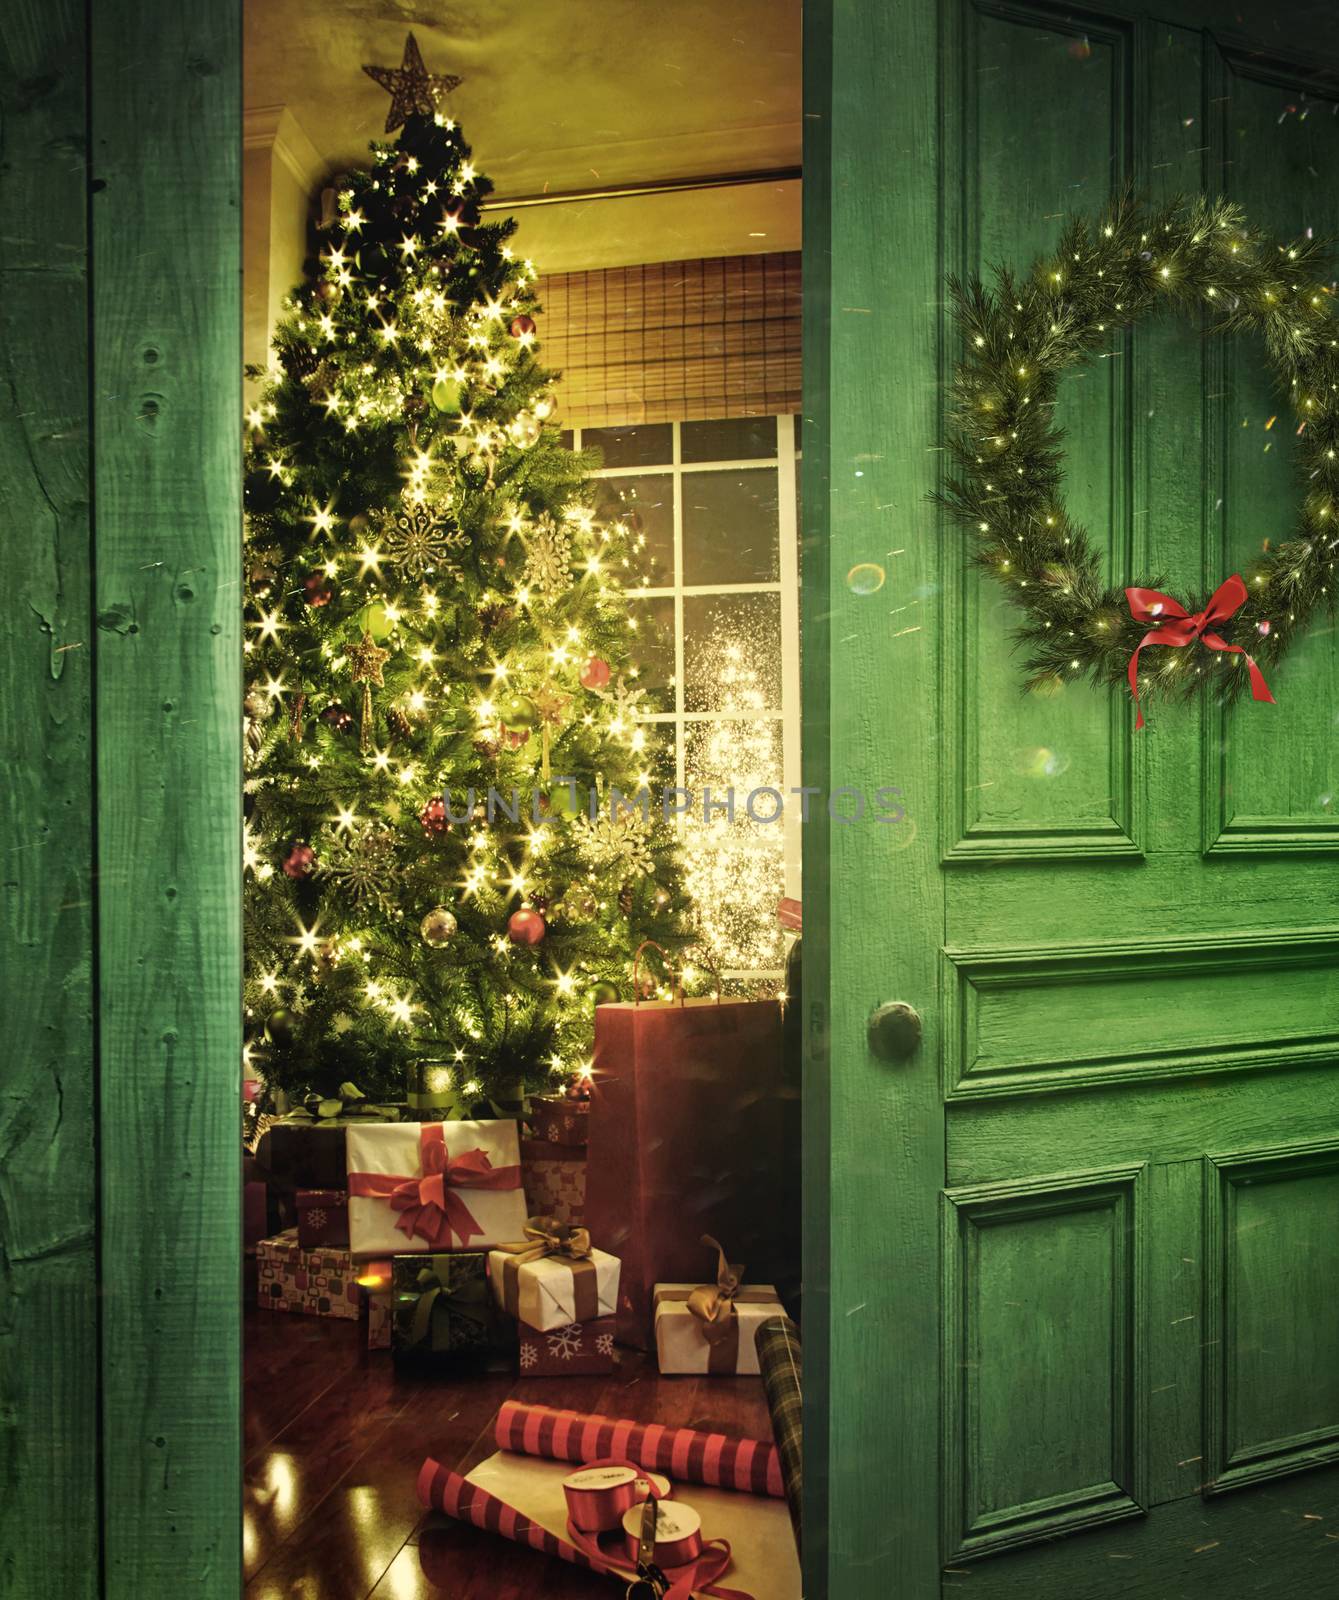 Rustic door opening into a room with Christmas tree